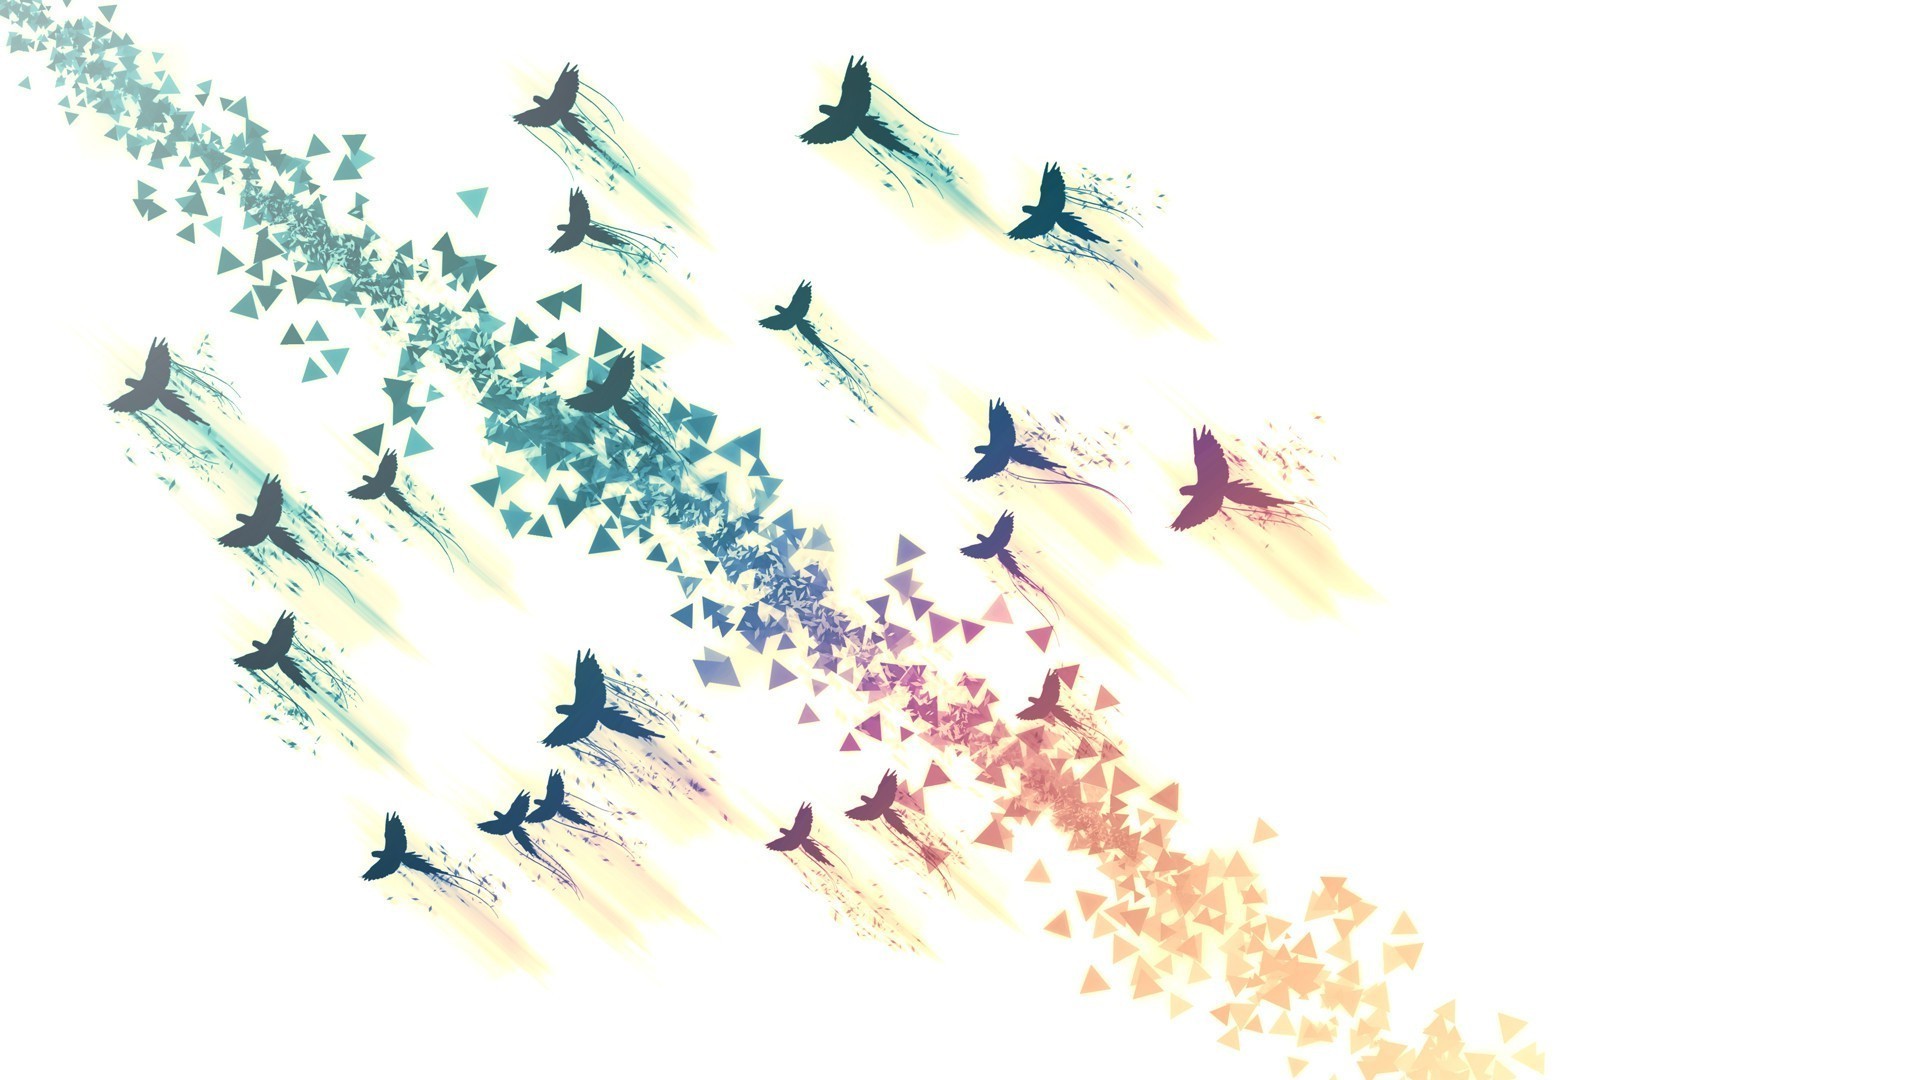 Bird and triangle silhouettes Wallpaper 2652